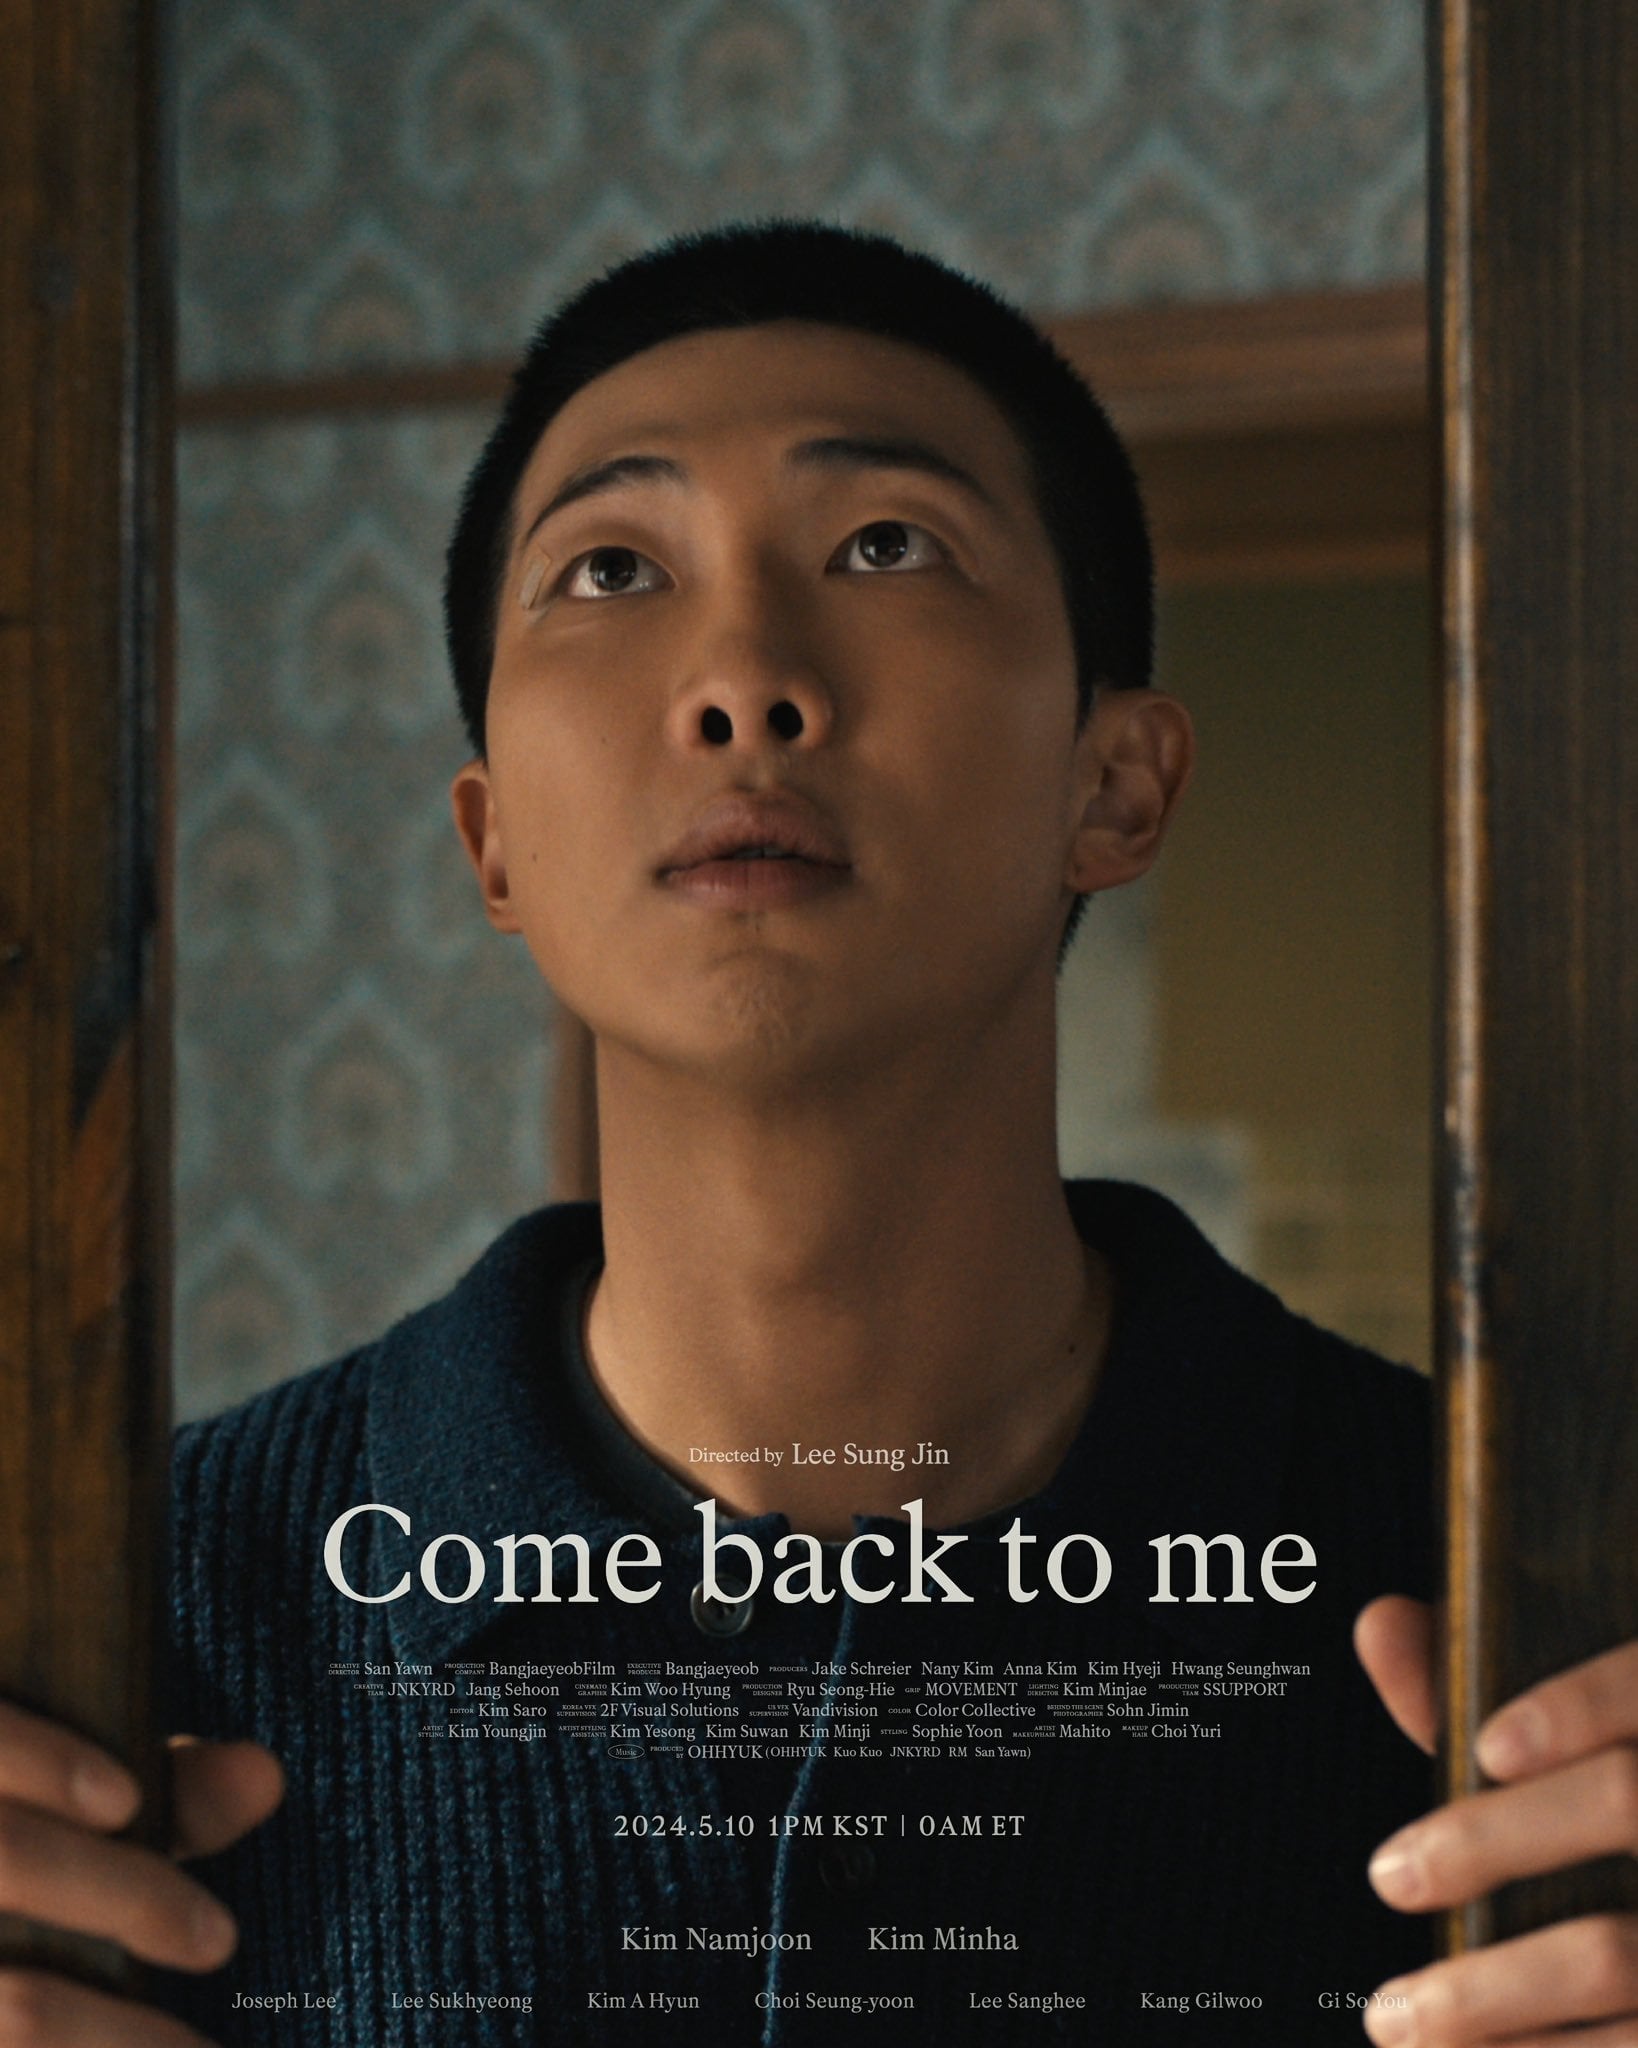 RM's 'Come Back To Me' SNS Mentions and Press Coverage Megathread